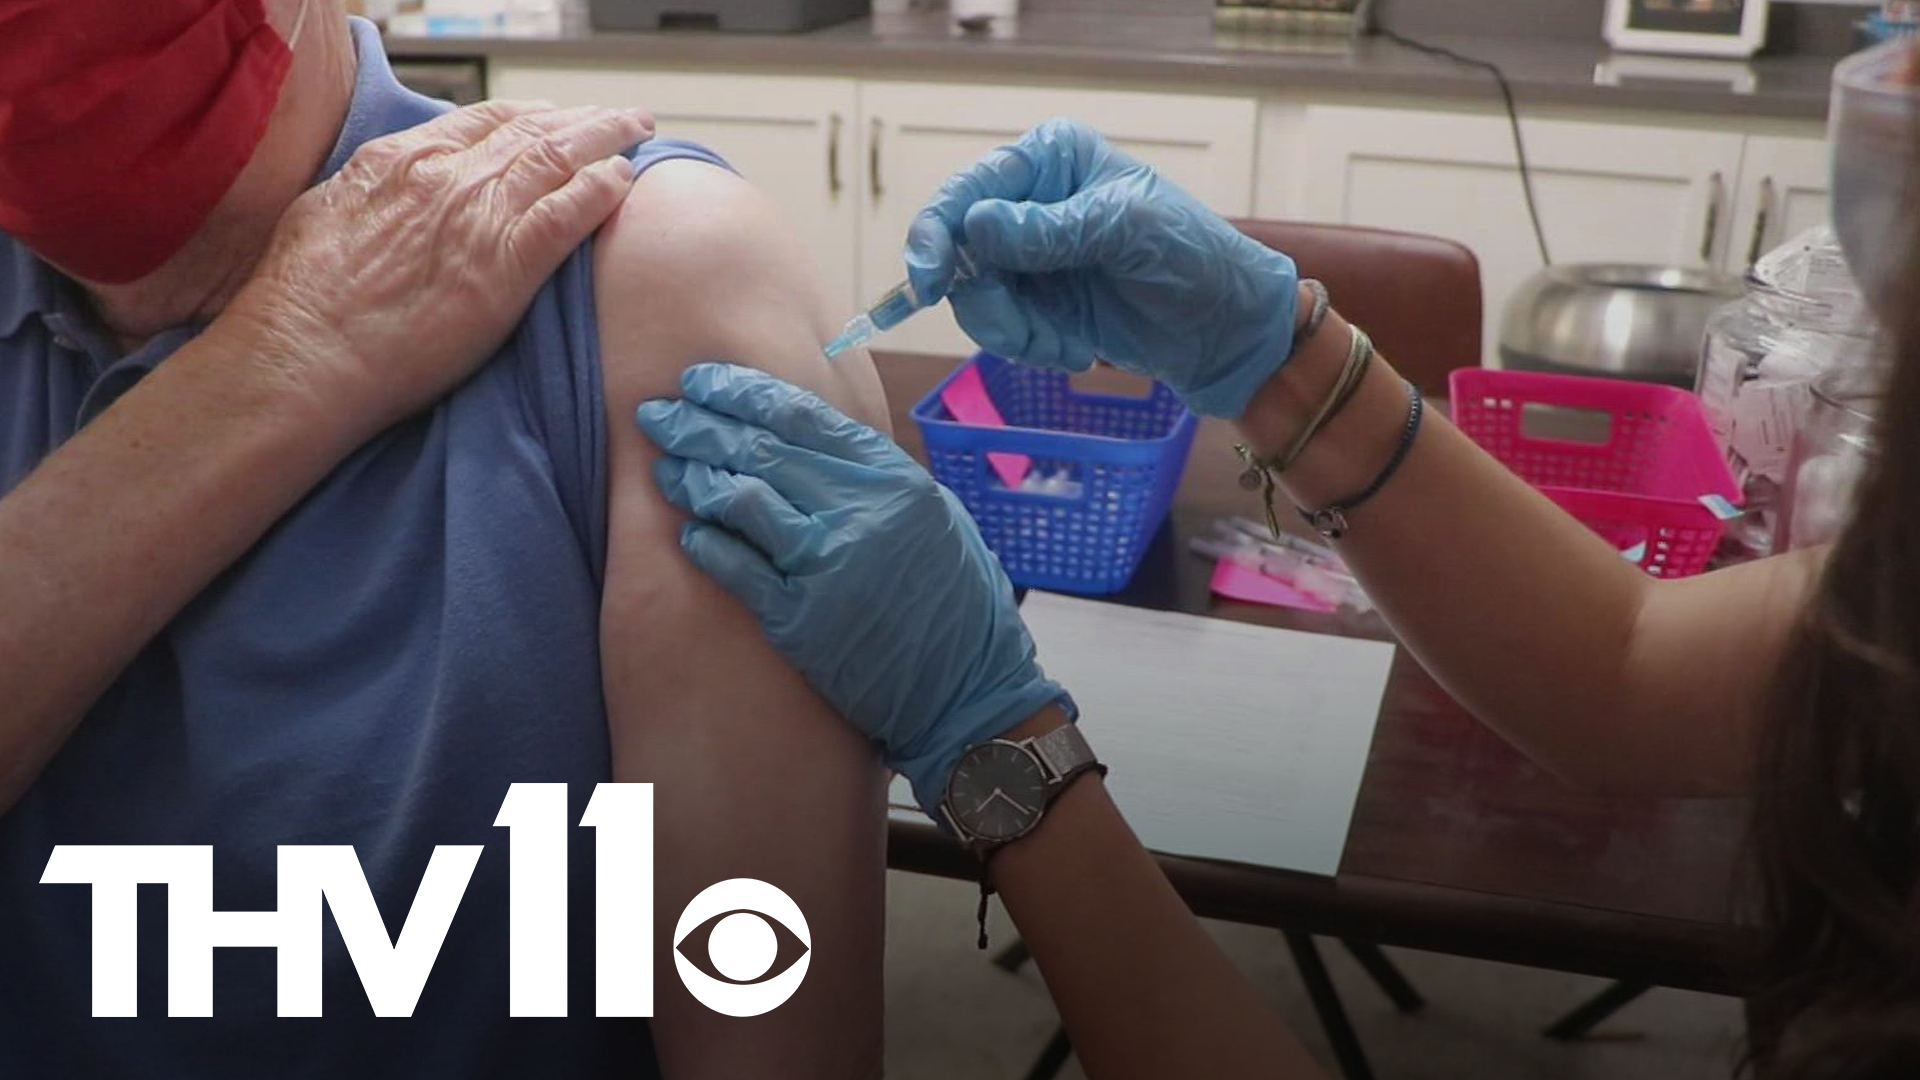 For the past couple of months, health professionals have been encouraging and urging people to get the flu shot. Turns out, people are listening.